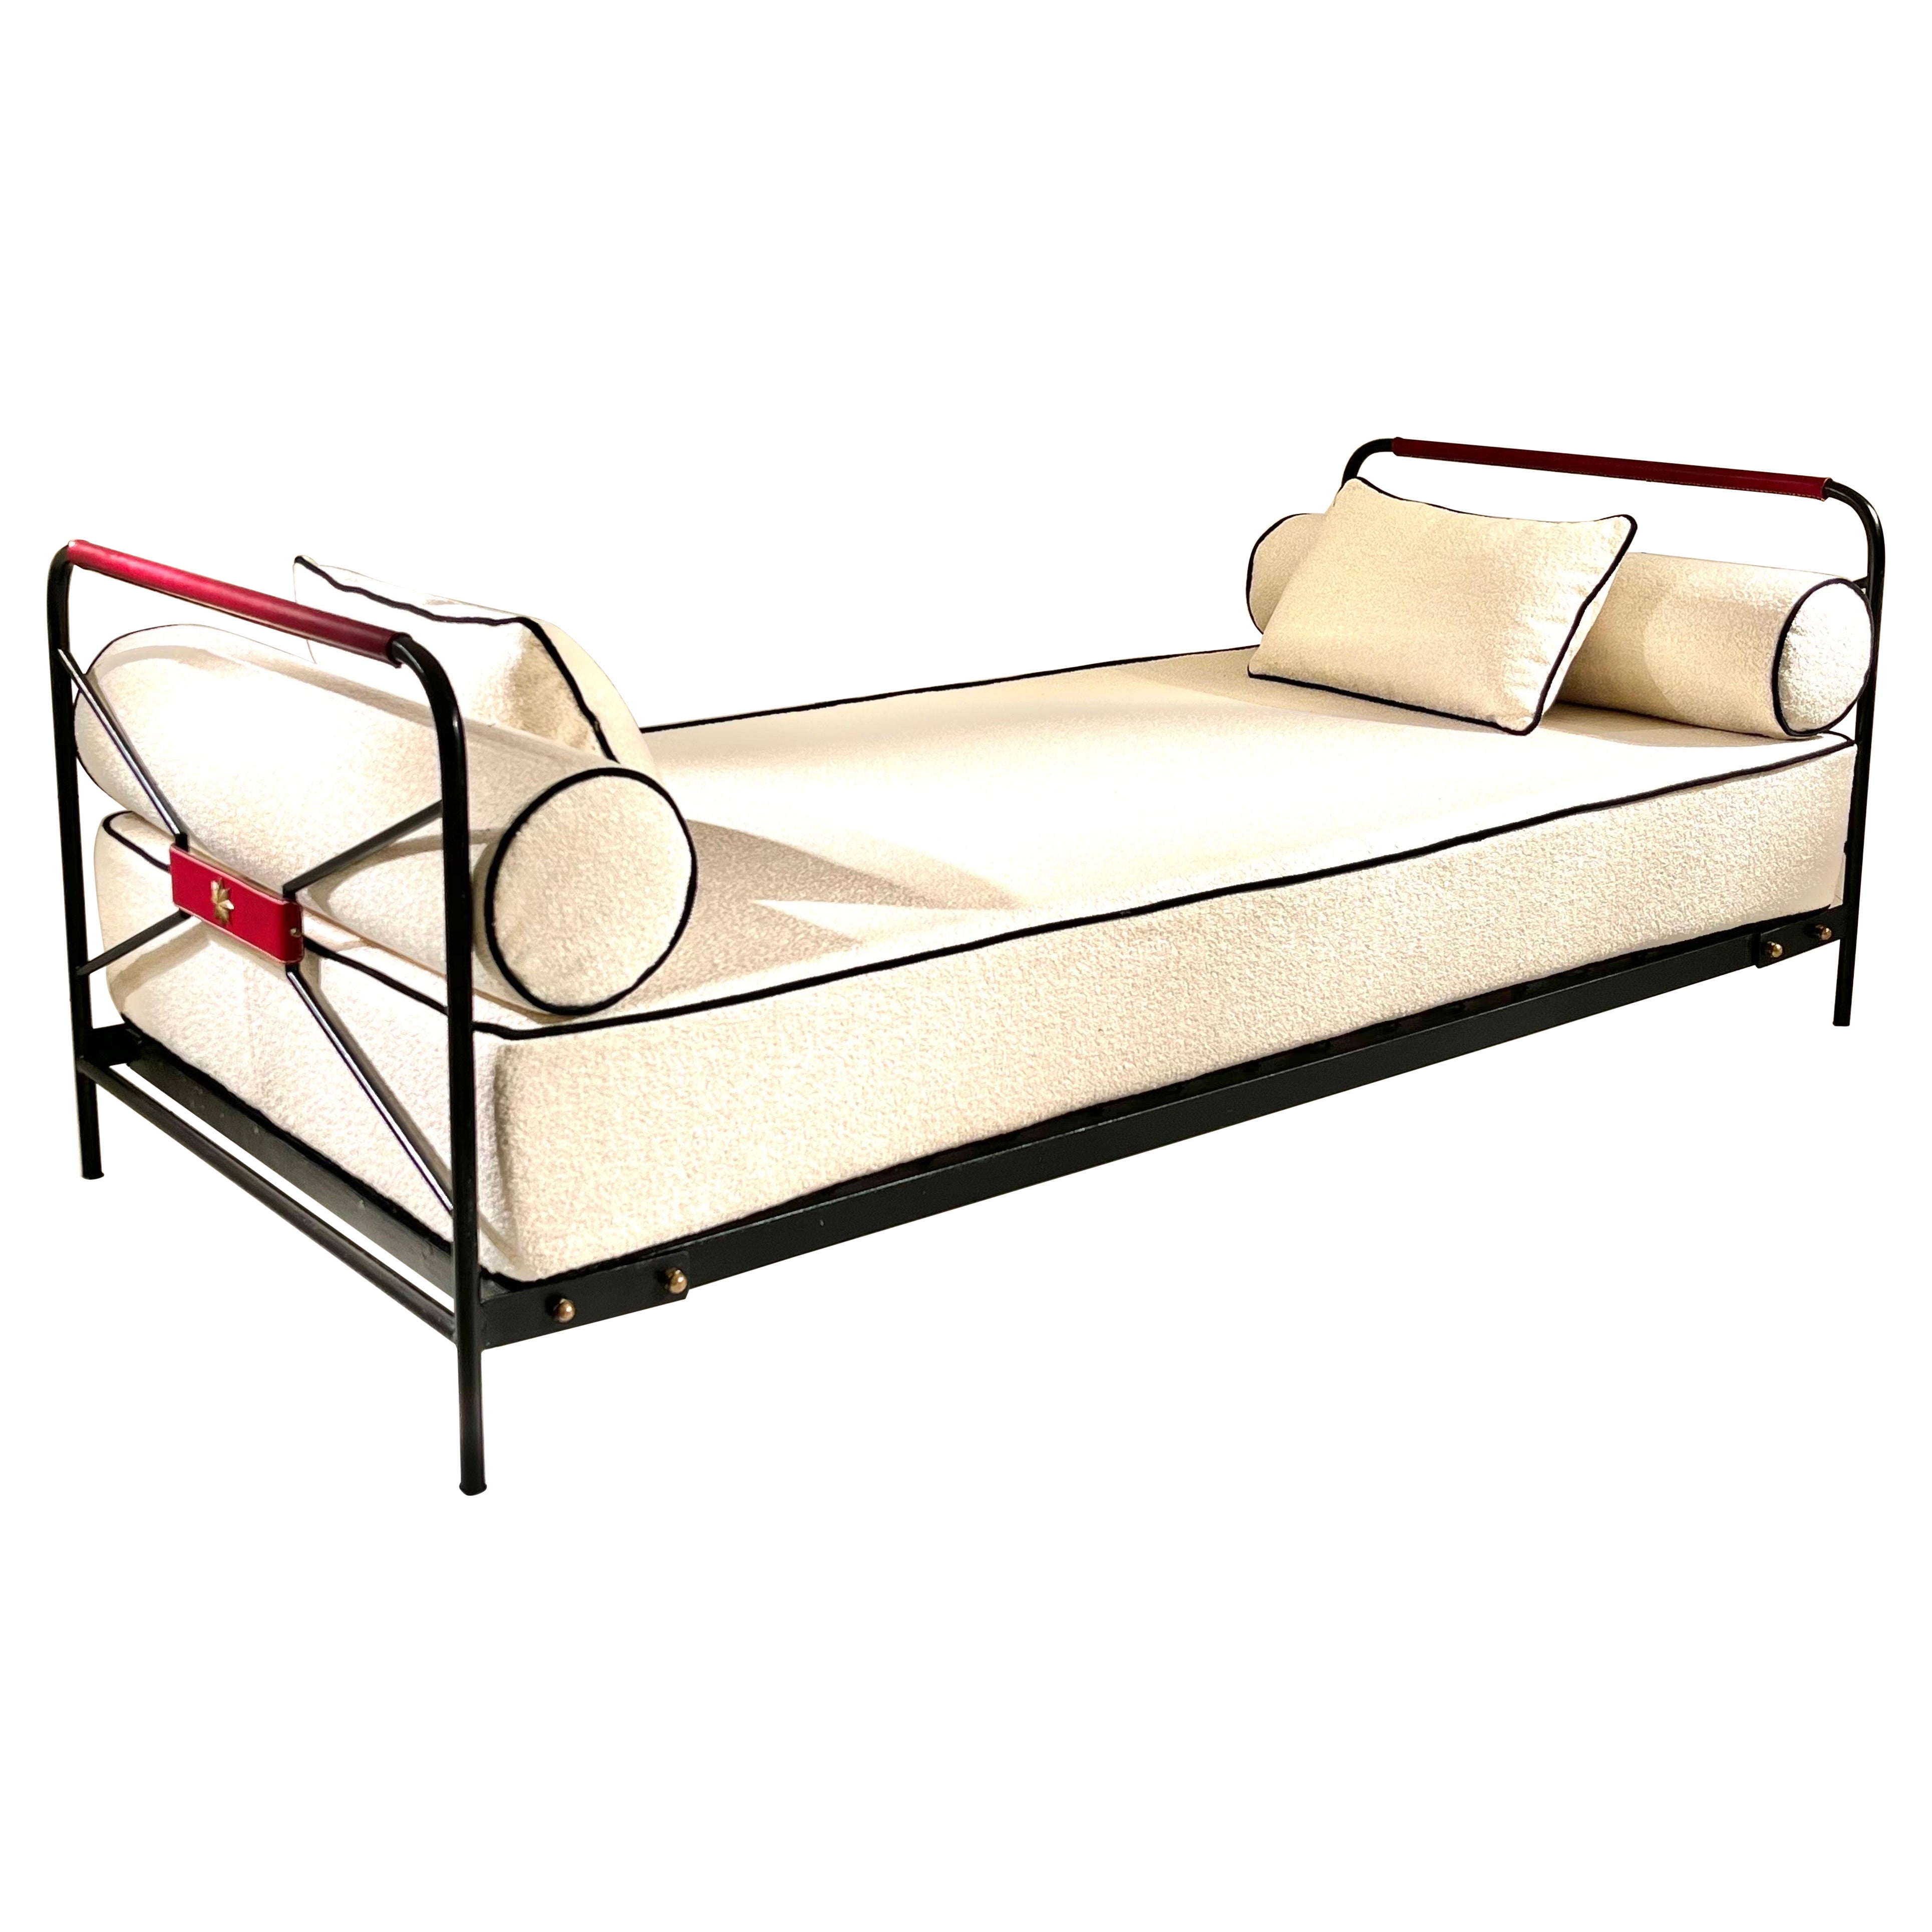 Red Stiched leather and iron daybed by Jacques Adnet
2 Brass stars on the leather 
Great condition.